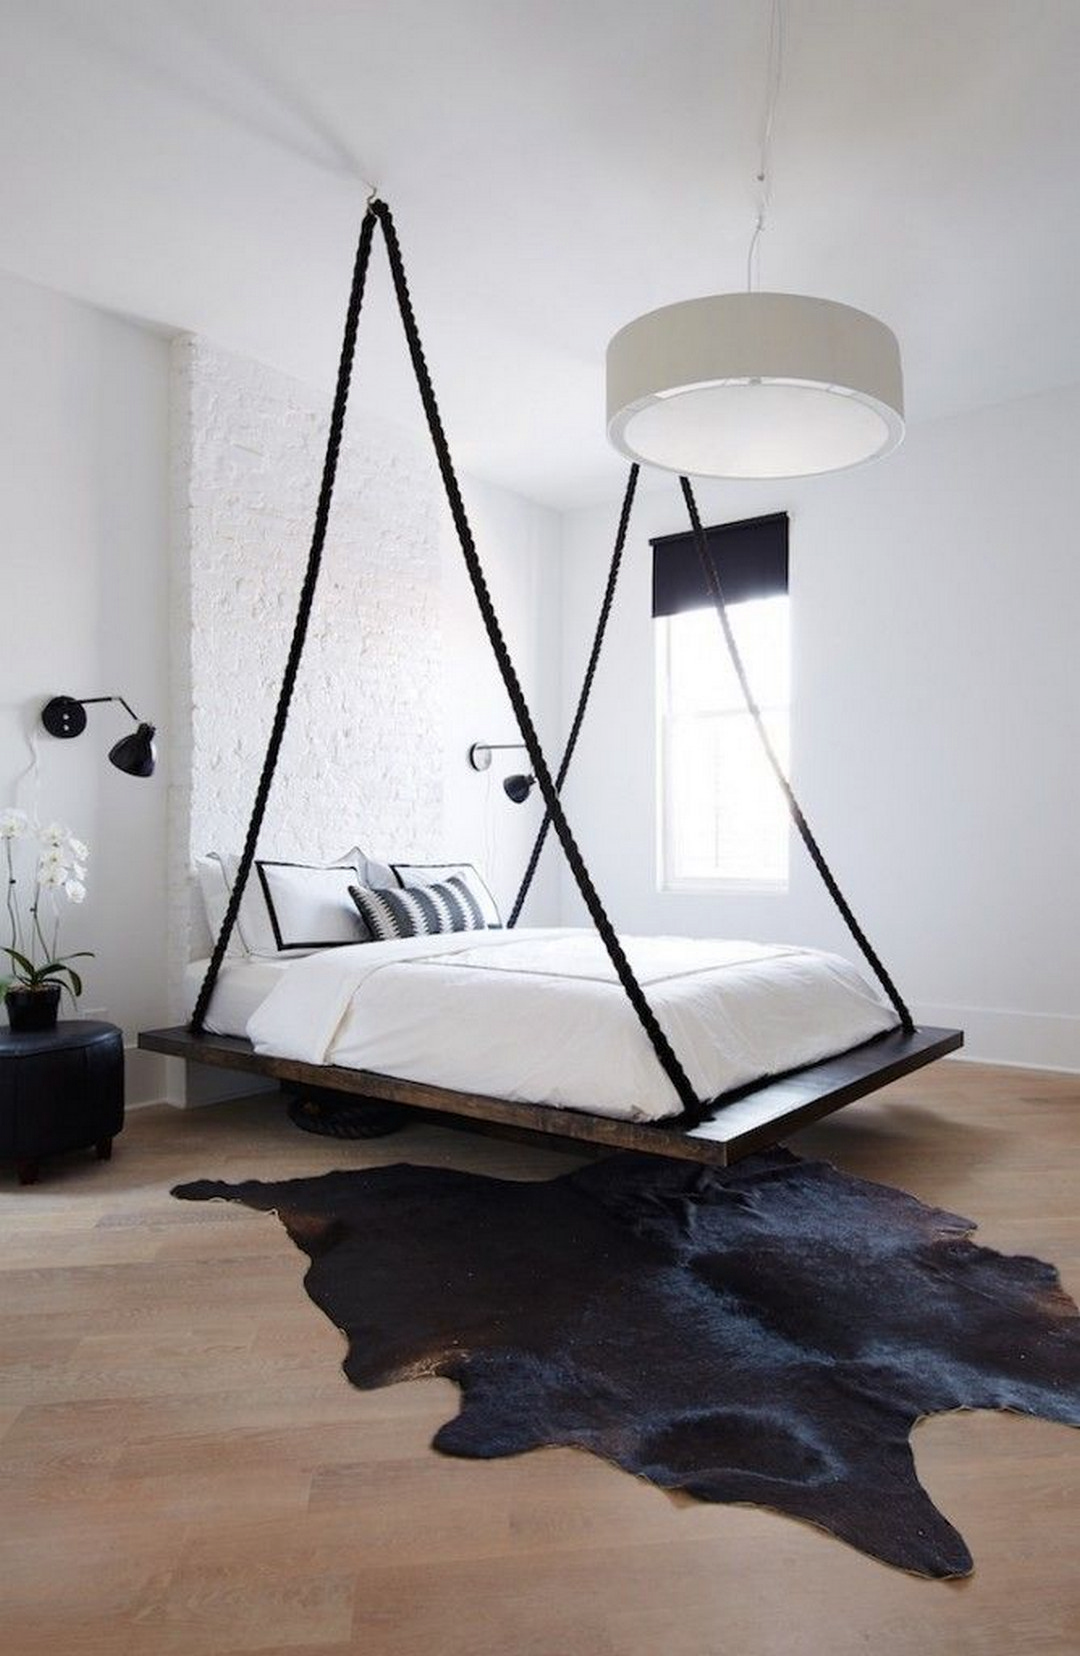 Hanging Bed Ideas That Look Surprisingly Amazing